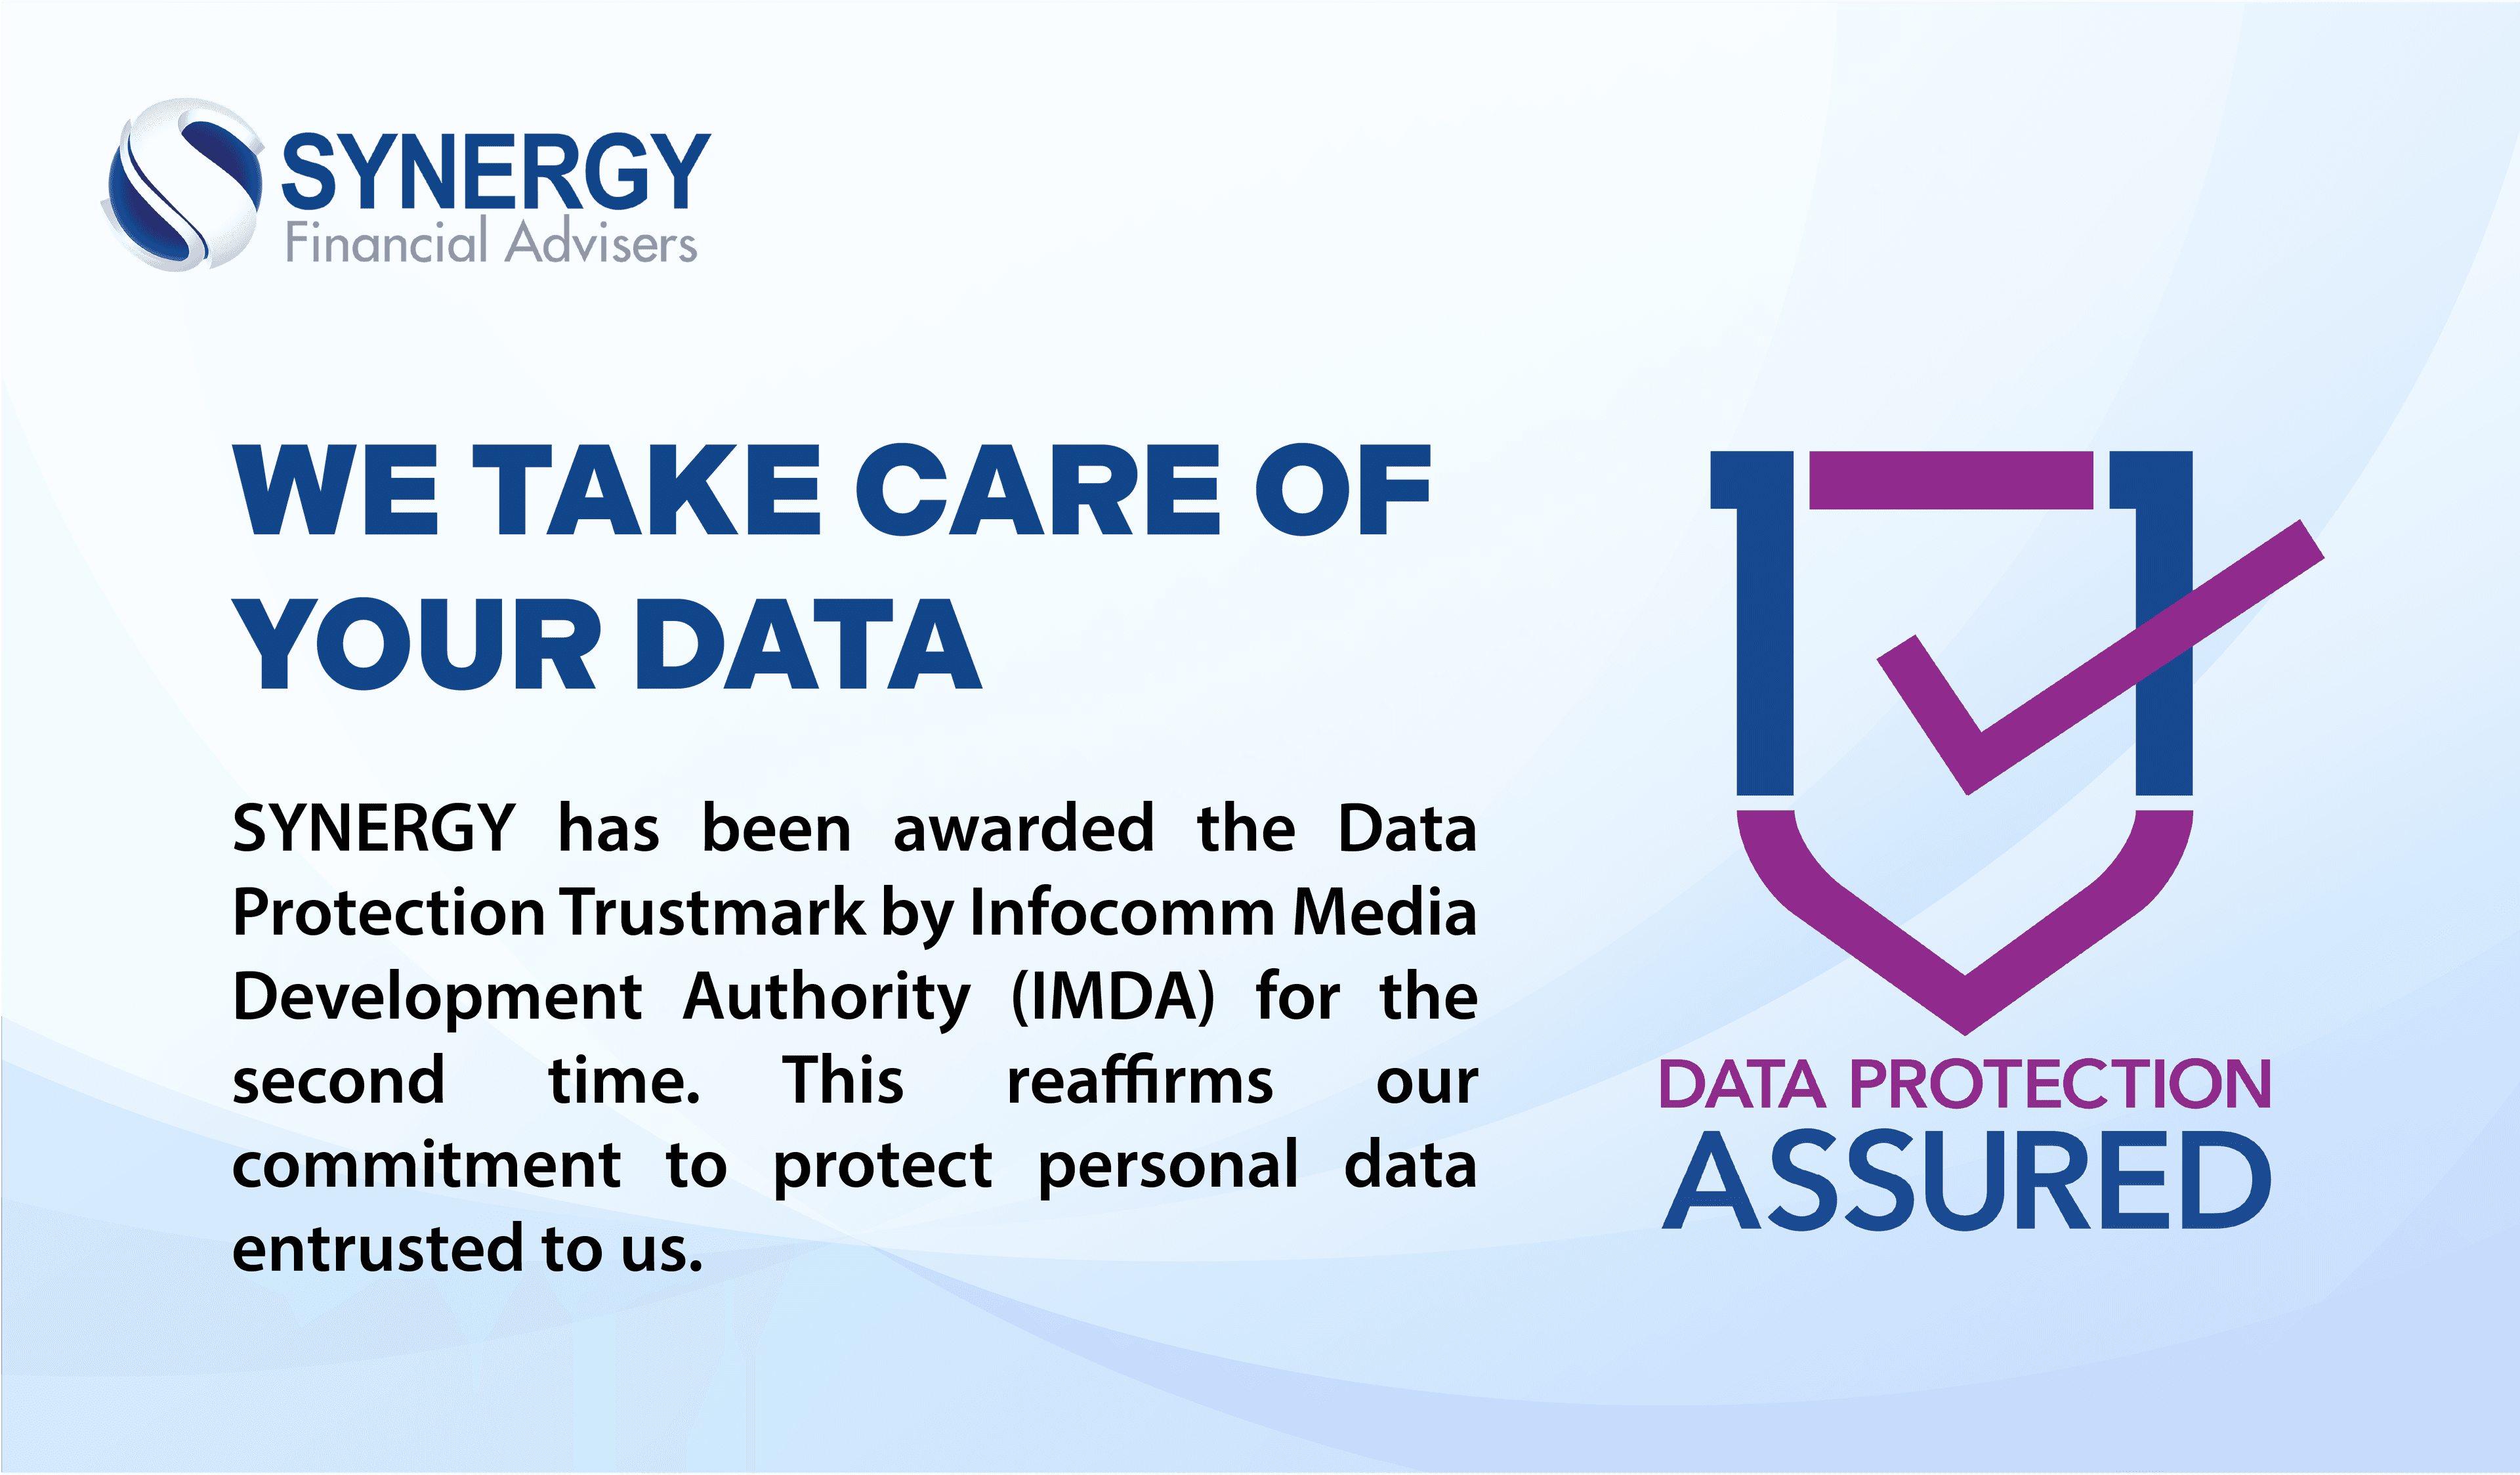 SYNERGY Awarded the Data Protection Trustmark Certification for the Second Time